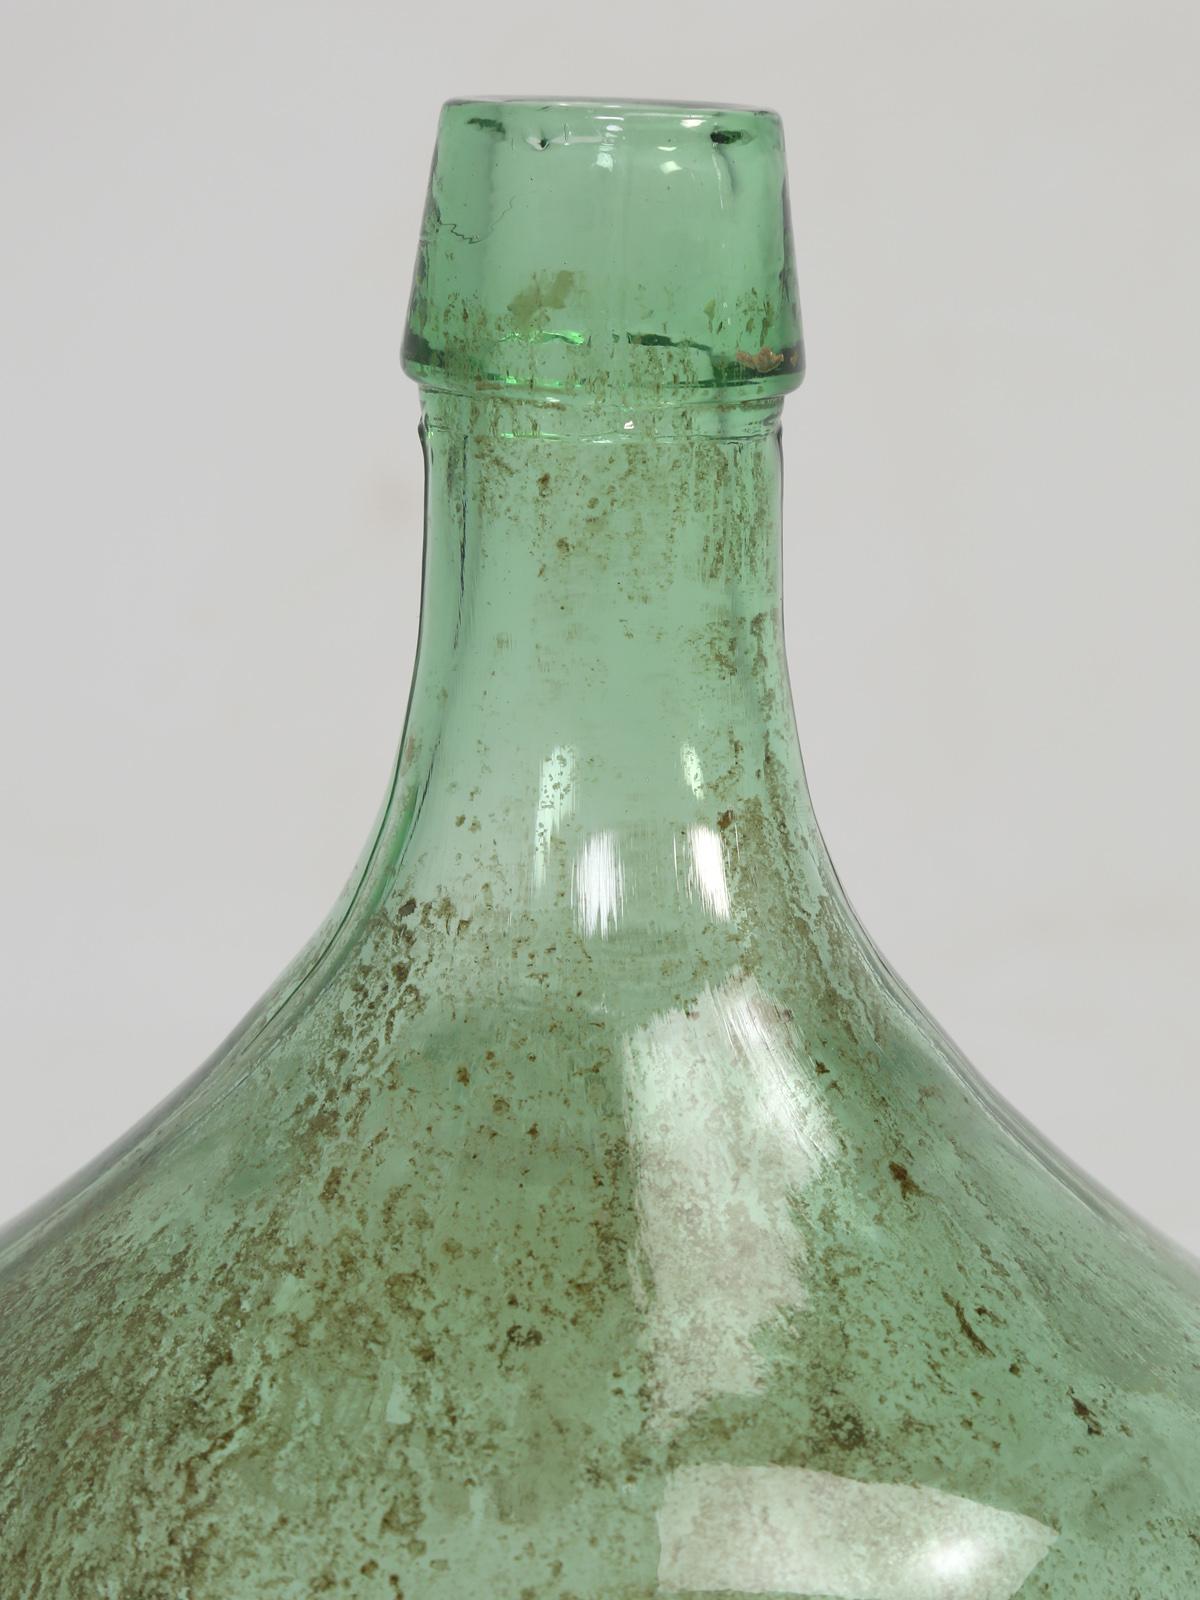 Late 19th Century Antique Demijohn from France